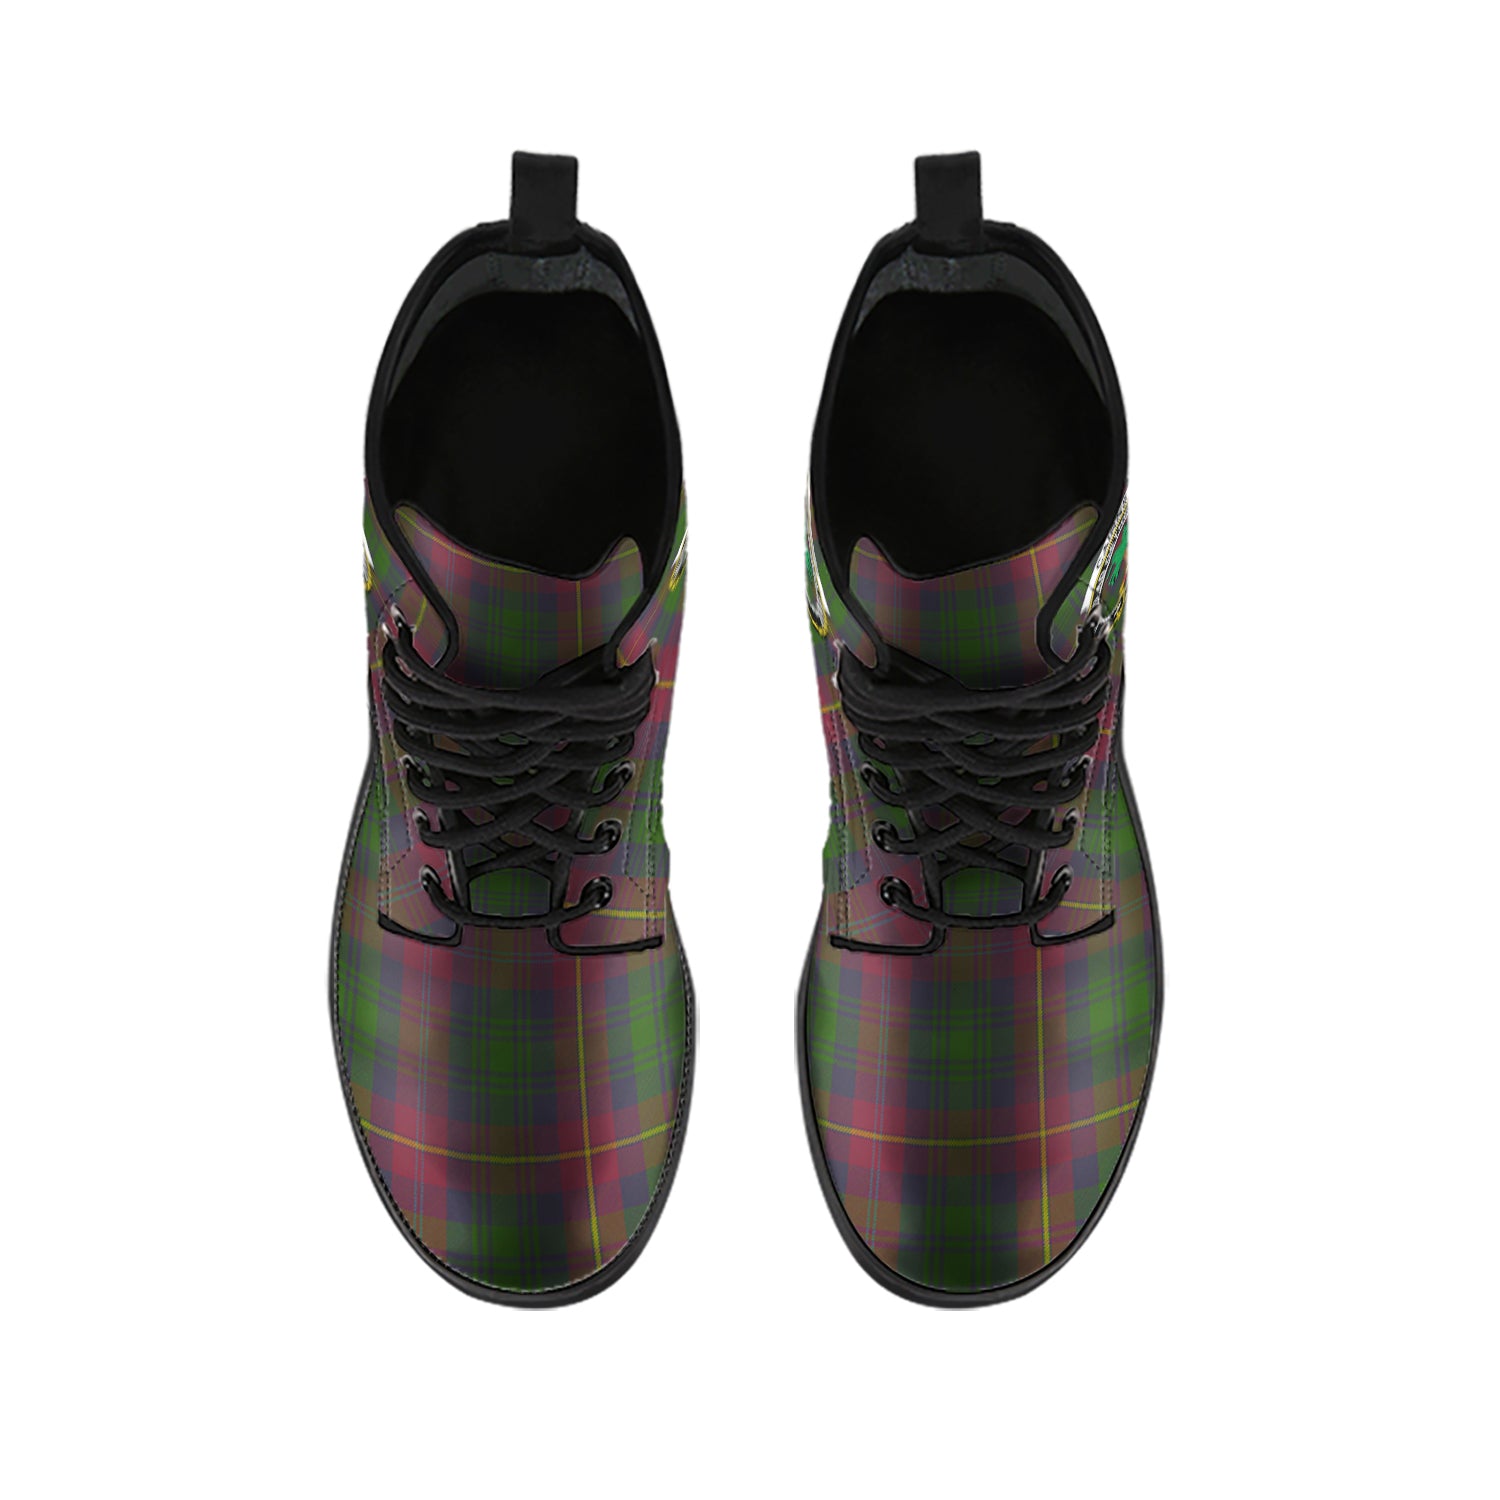 Cairns Tartan Leather Boots with Family Crest